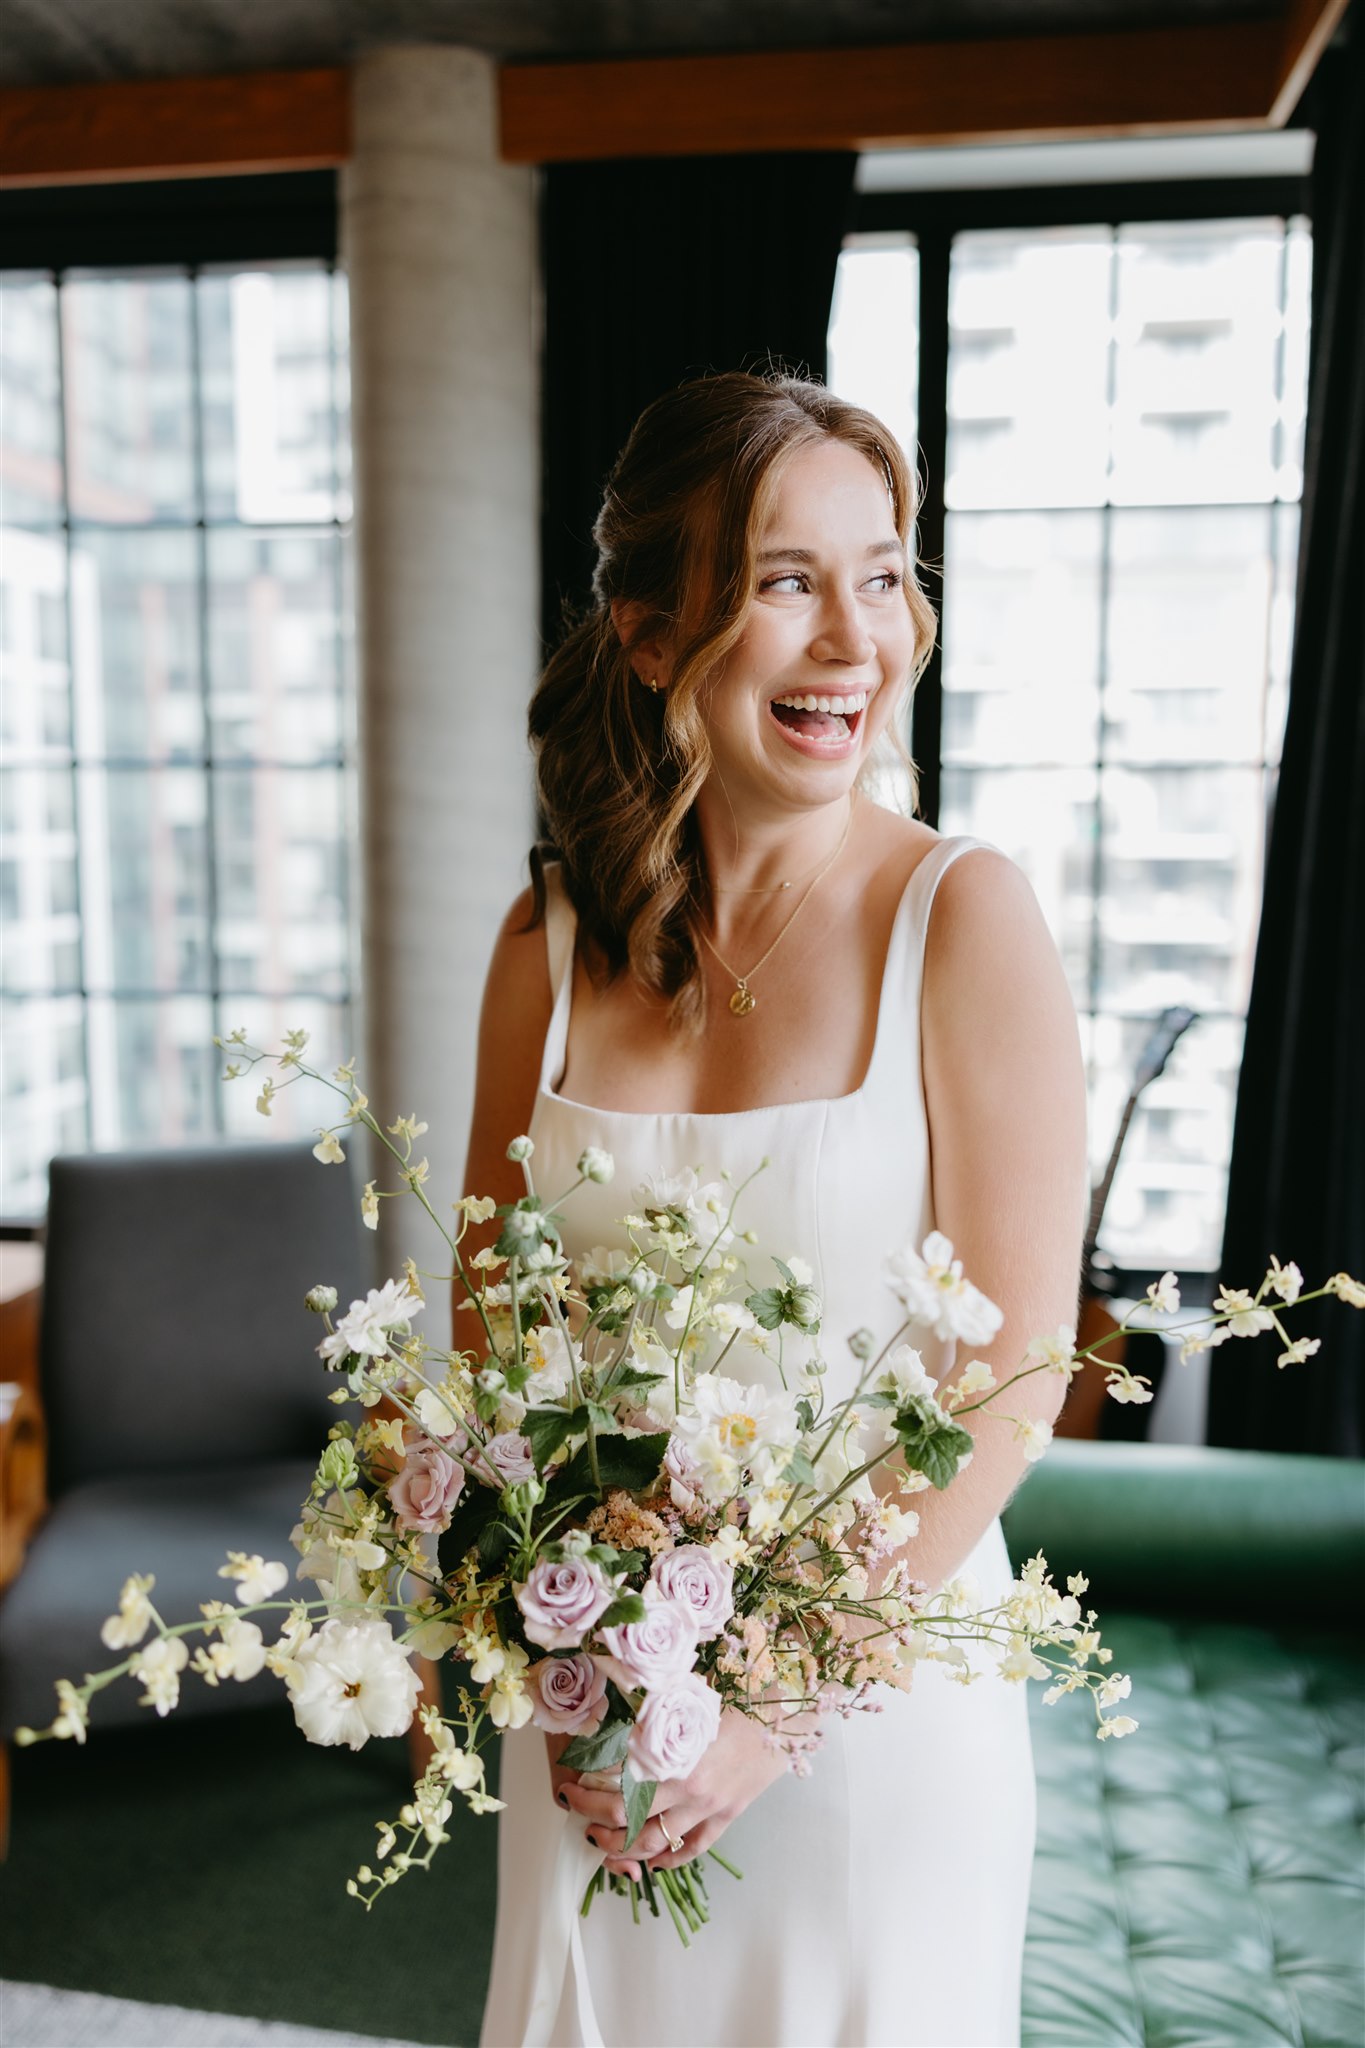 A joyful bride in a white dress holding a bouquet of pink and white flowers, laughing indoors with large windows in the background.